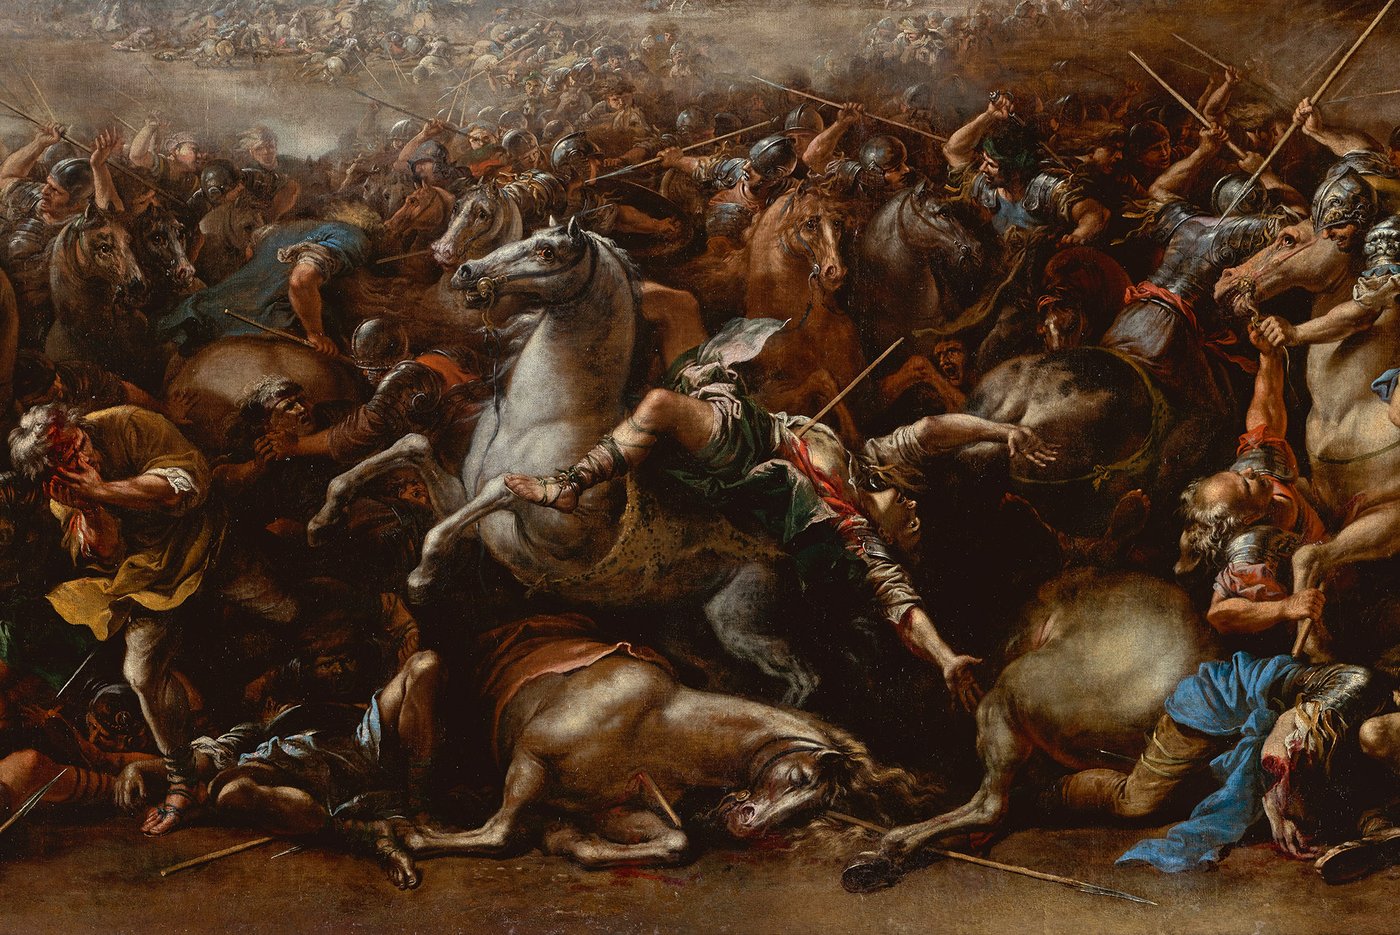 a wild battle with many horses and people